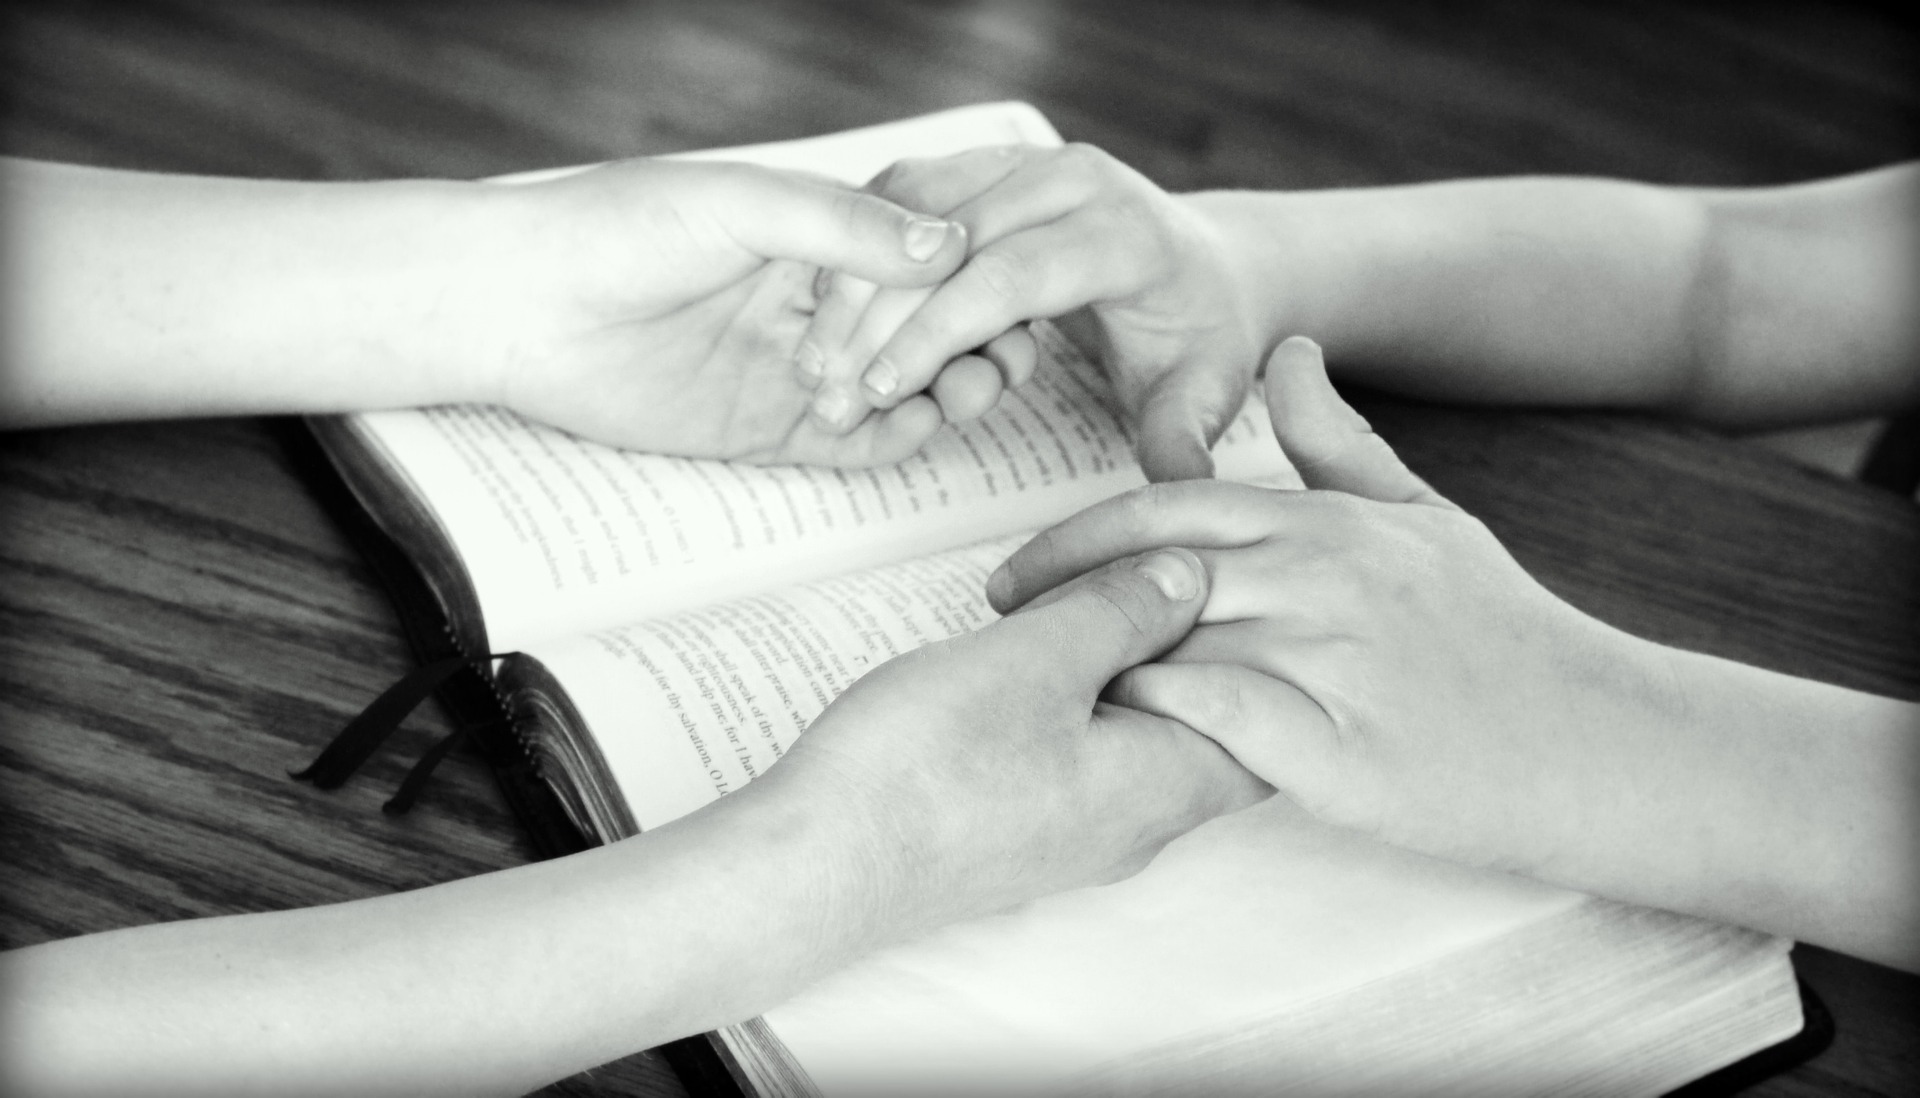 3 Simple Things I Learned About Prayer From My Mentor